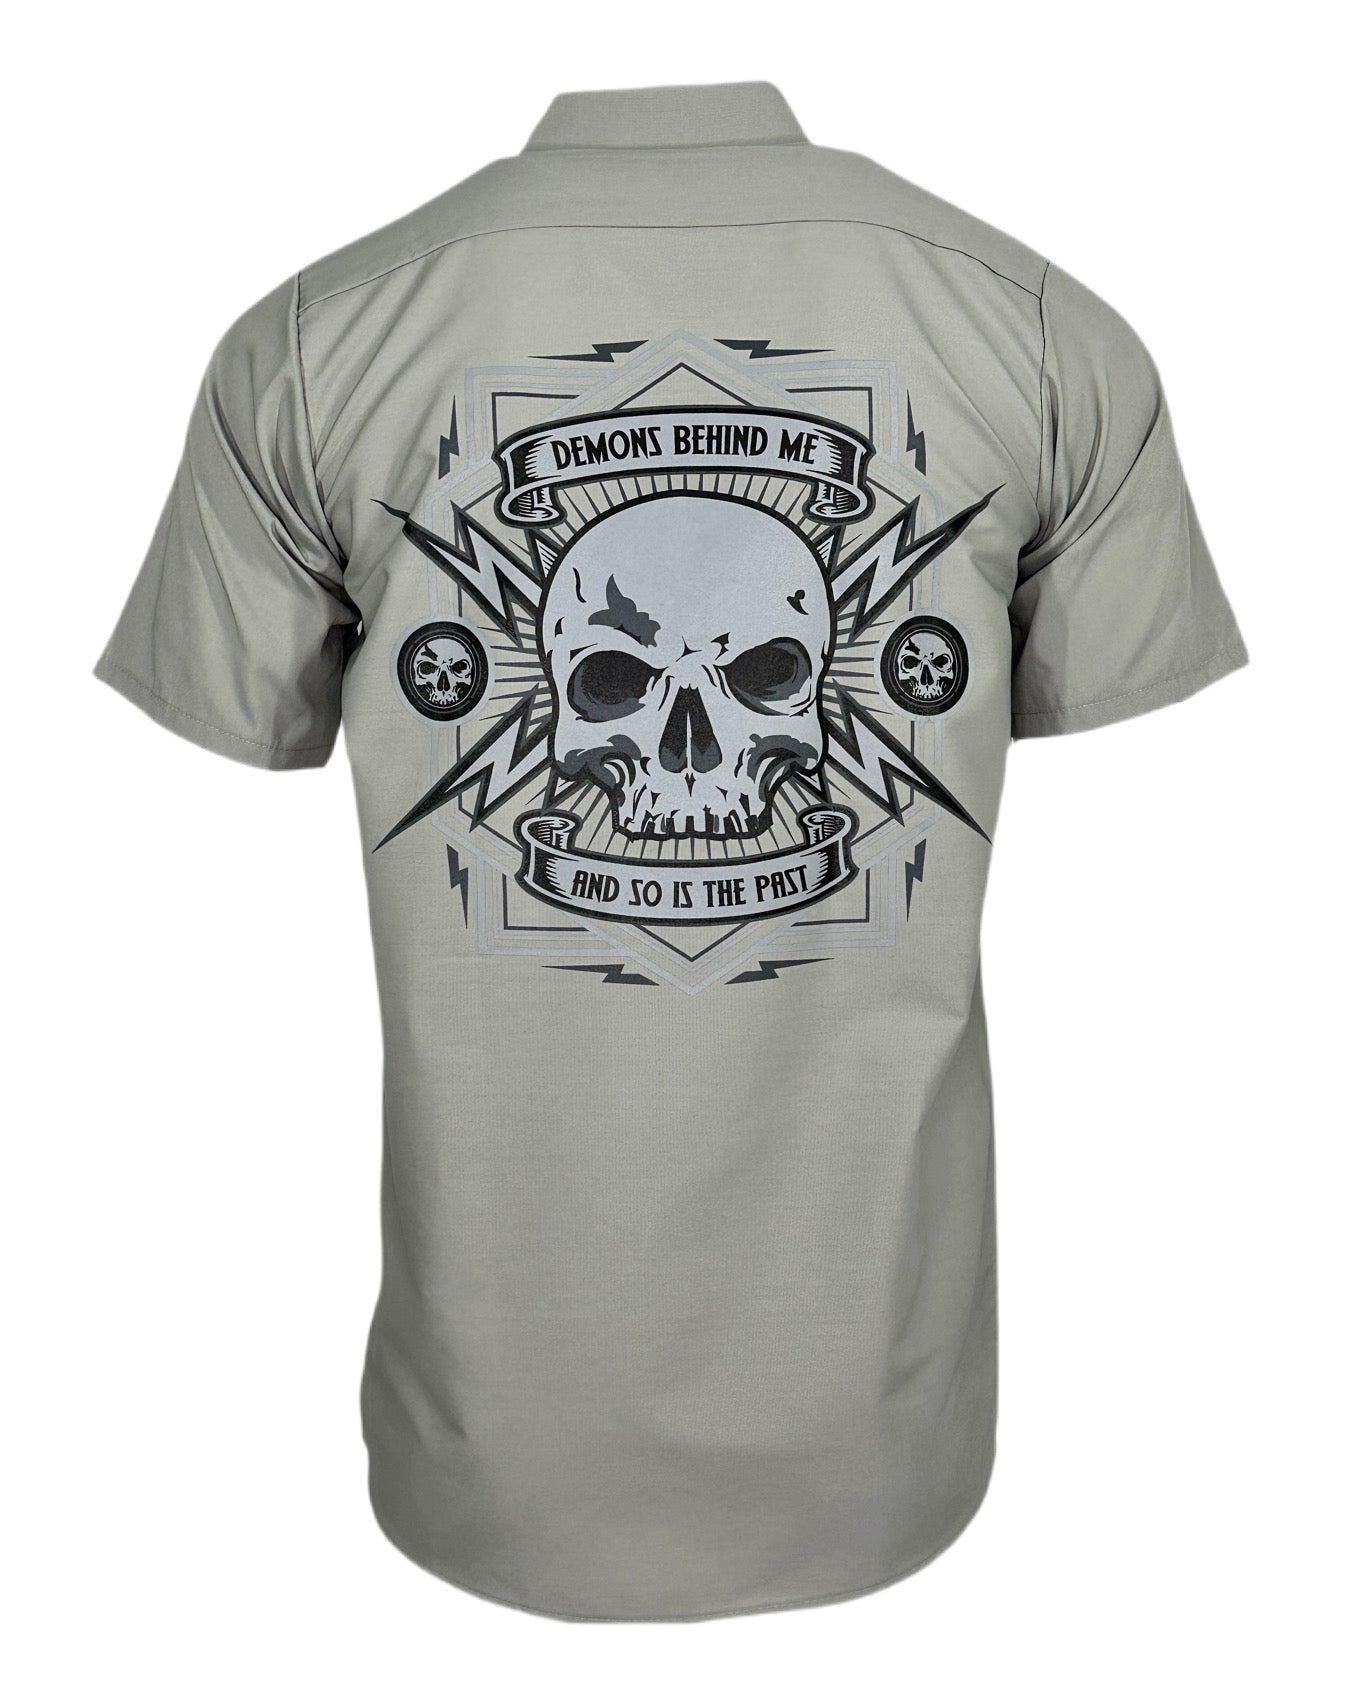 NEW! Men's Warm Gray Embroidered Electric Head Shop Shirt